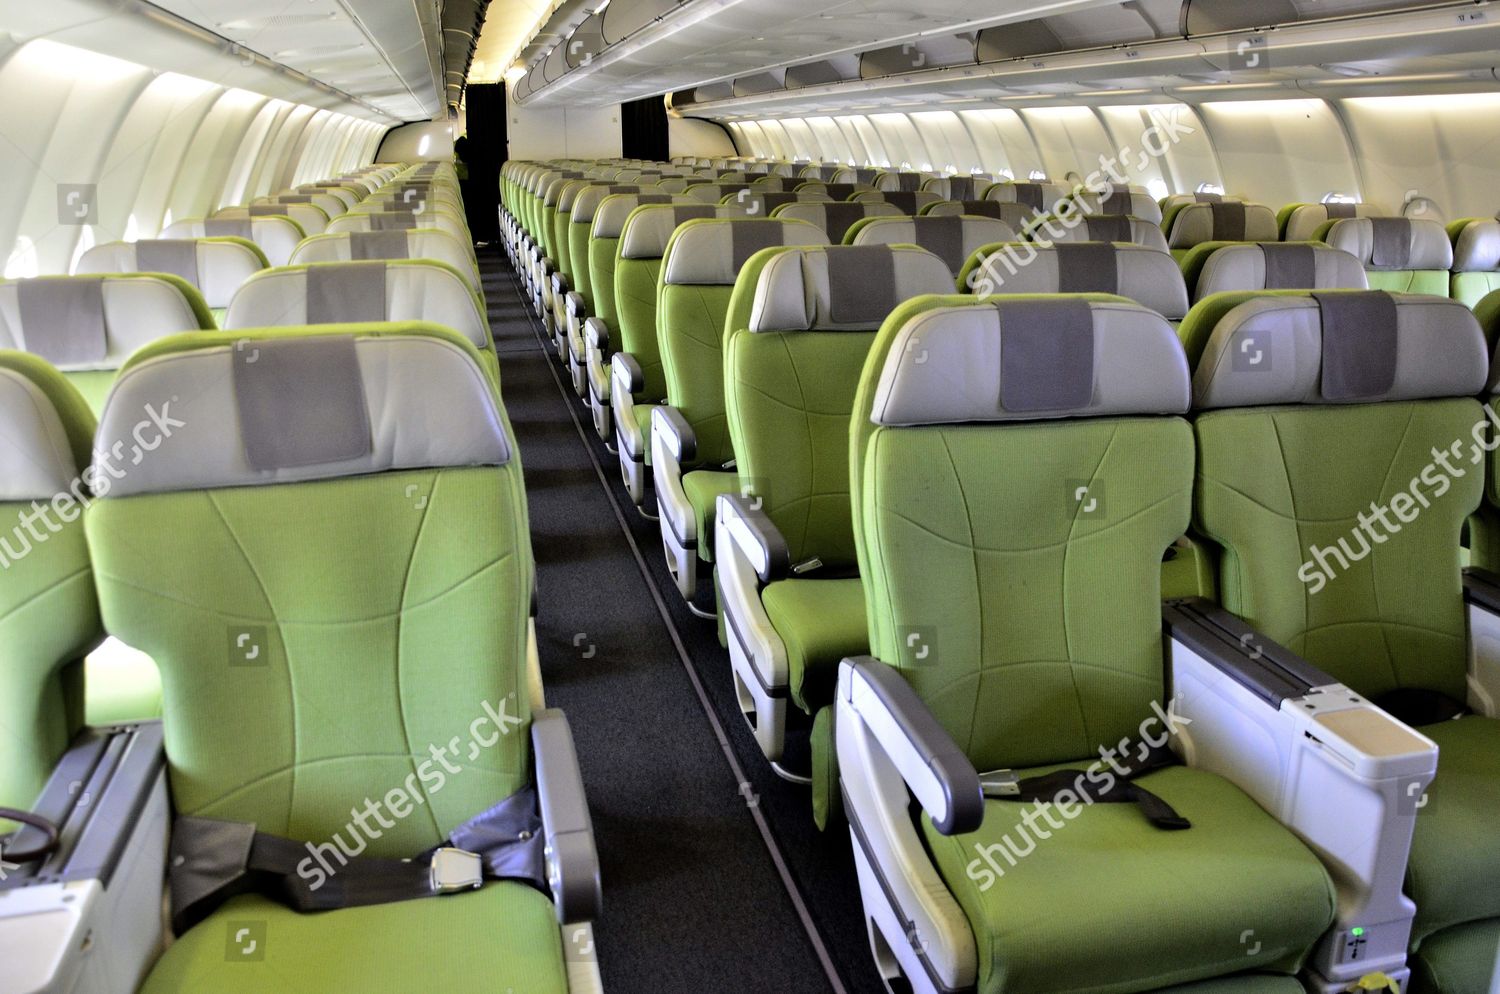 View Inside New Airbus A330300 Plane During Editorial Stock